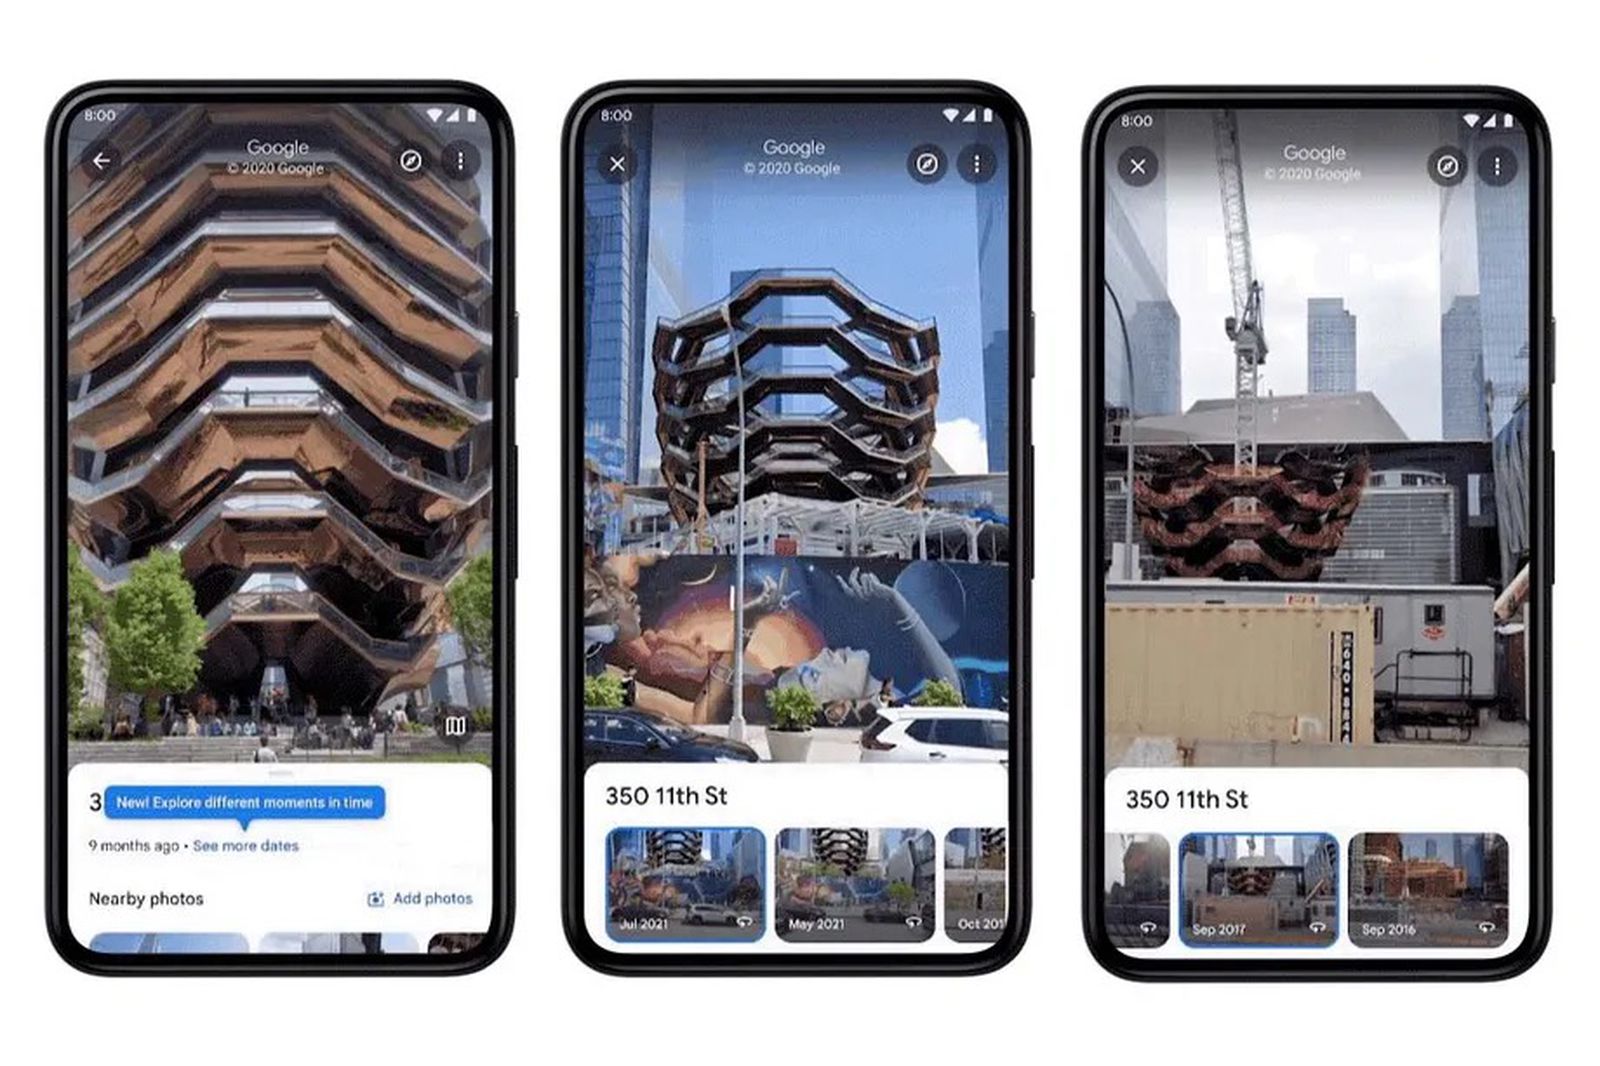 Google Maps' Historical Street View Imagery Now Available on iOS